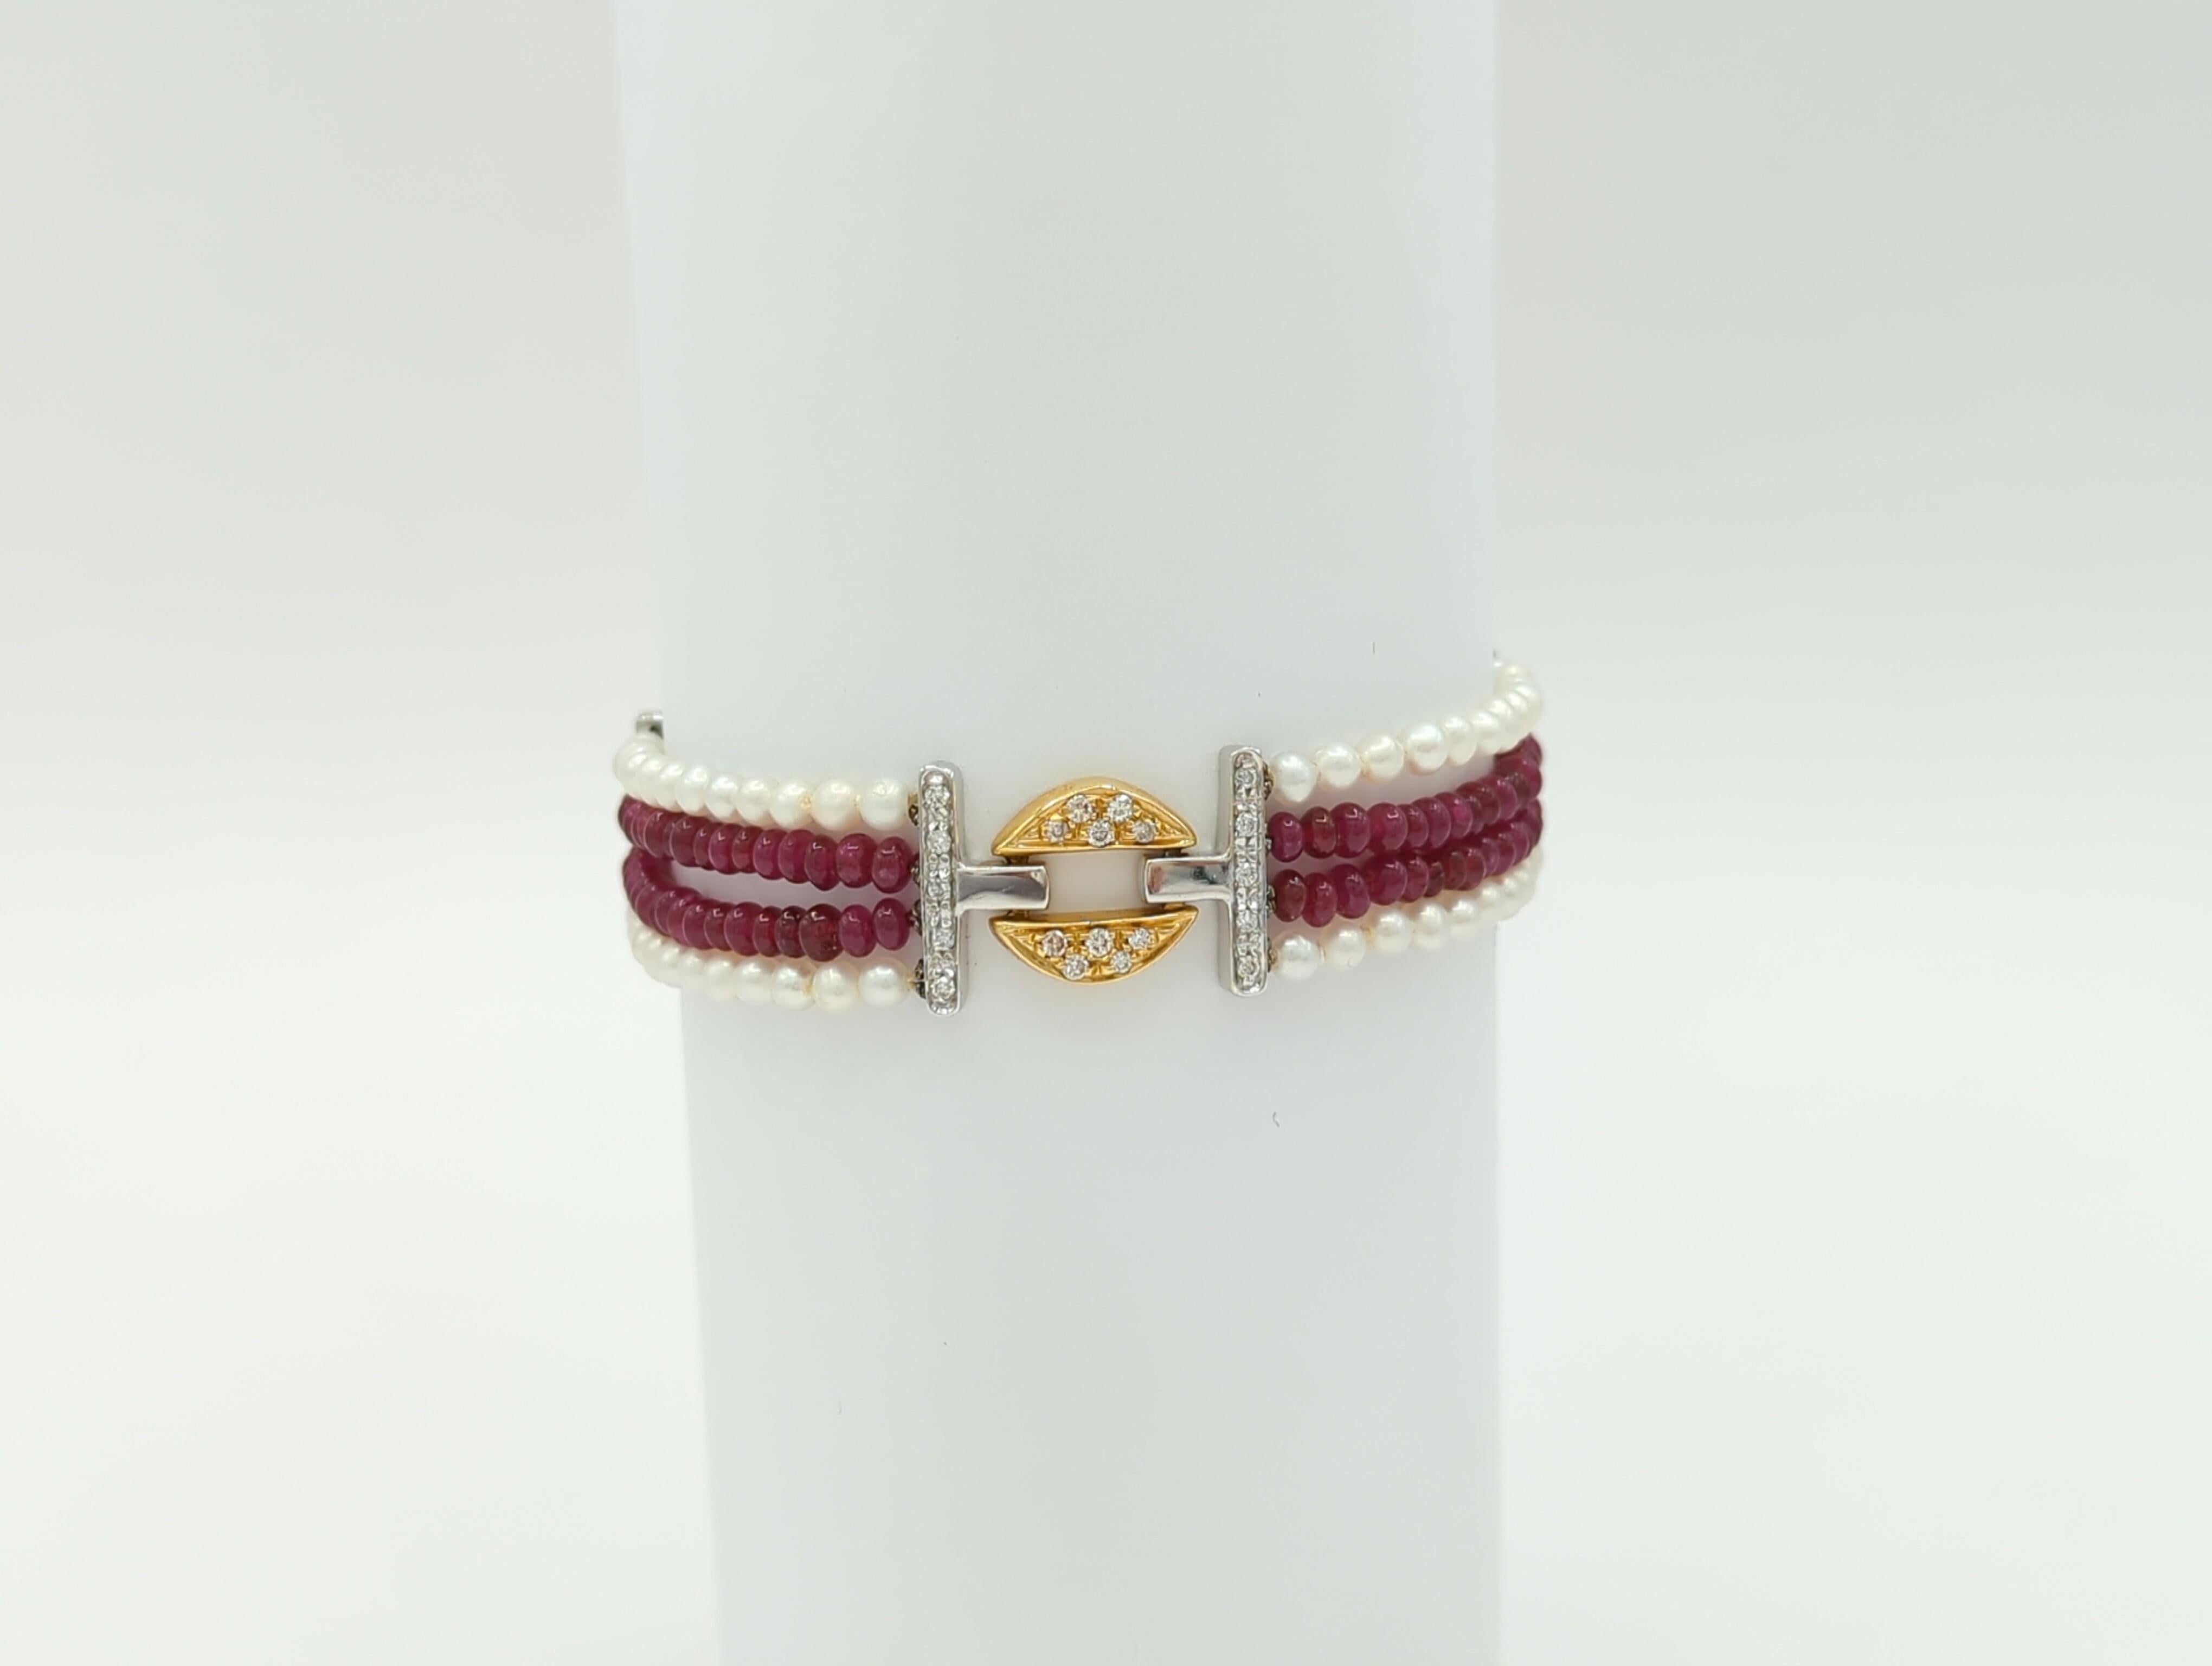 Ruby Bead, White Pearl, and White Diamond Bracelet in 18K 2 Tone Gold For Sale 6